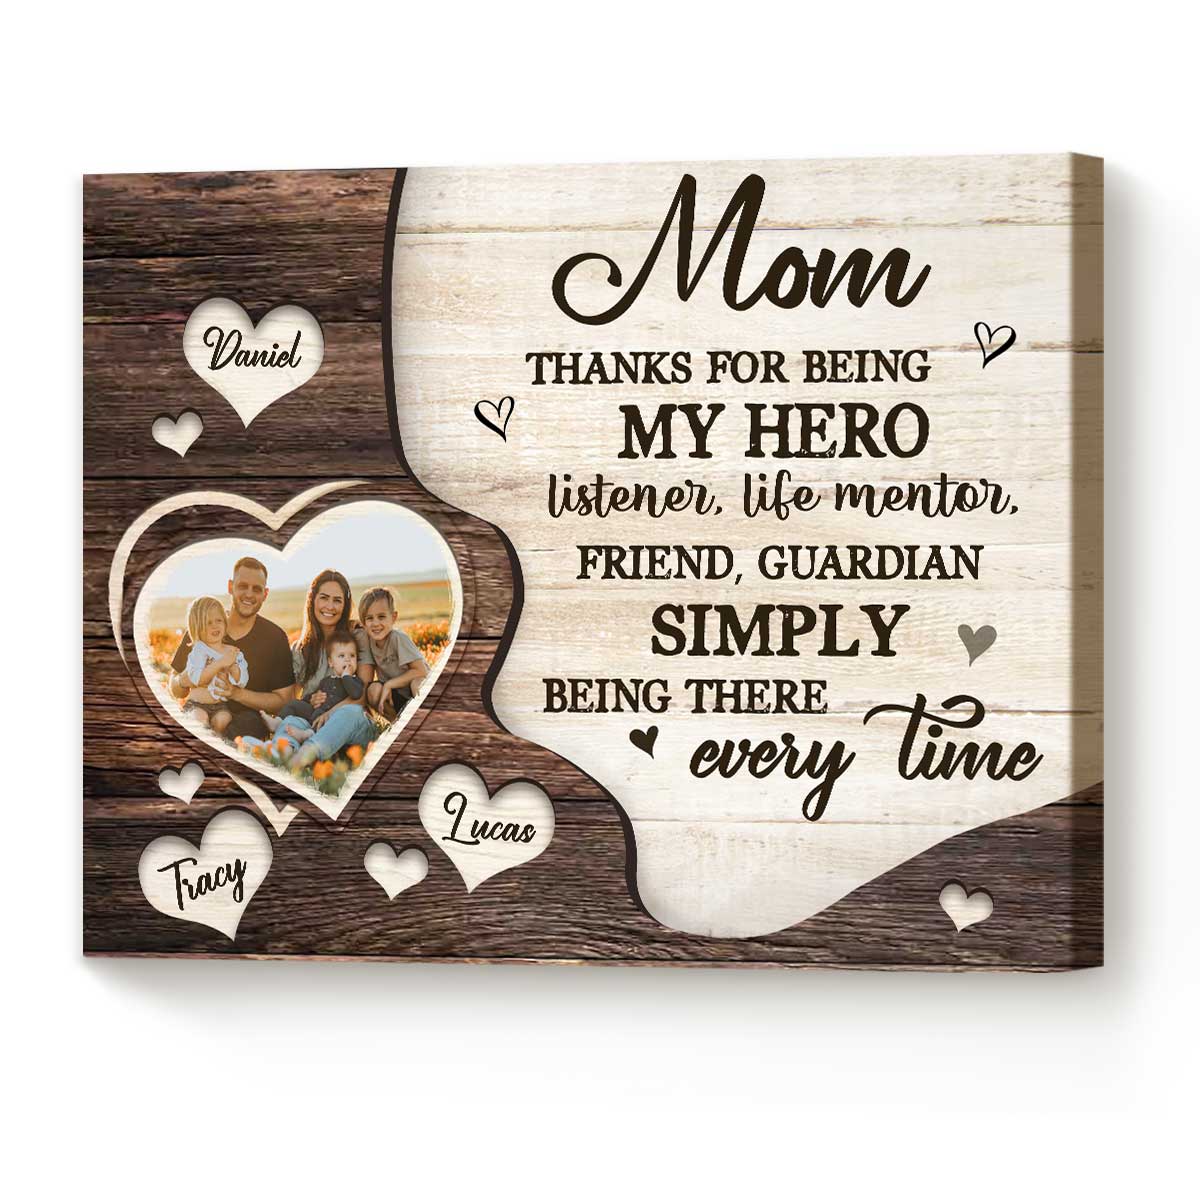 Mom Gift From Kids, Personalized Mom Gift, Personalized Poster